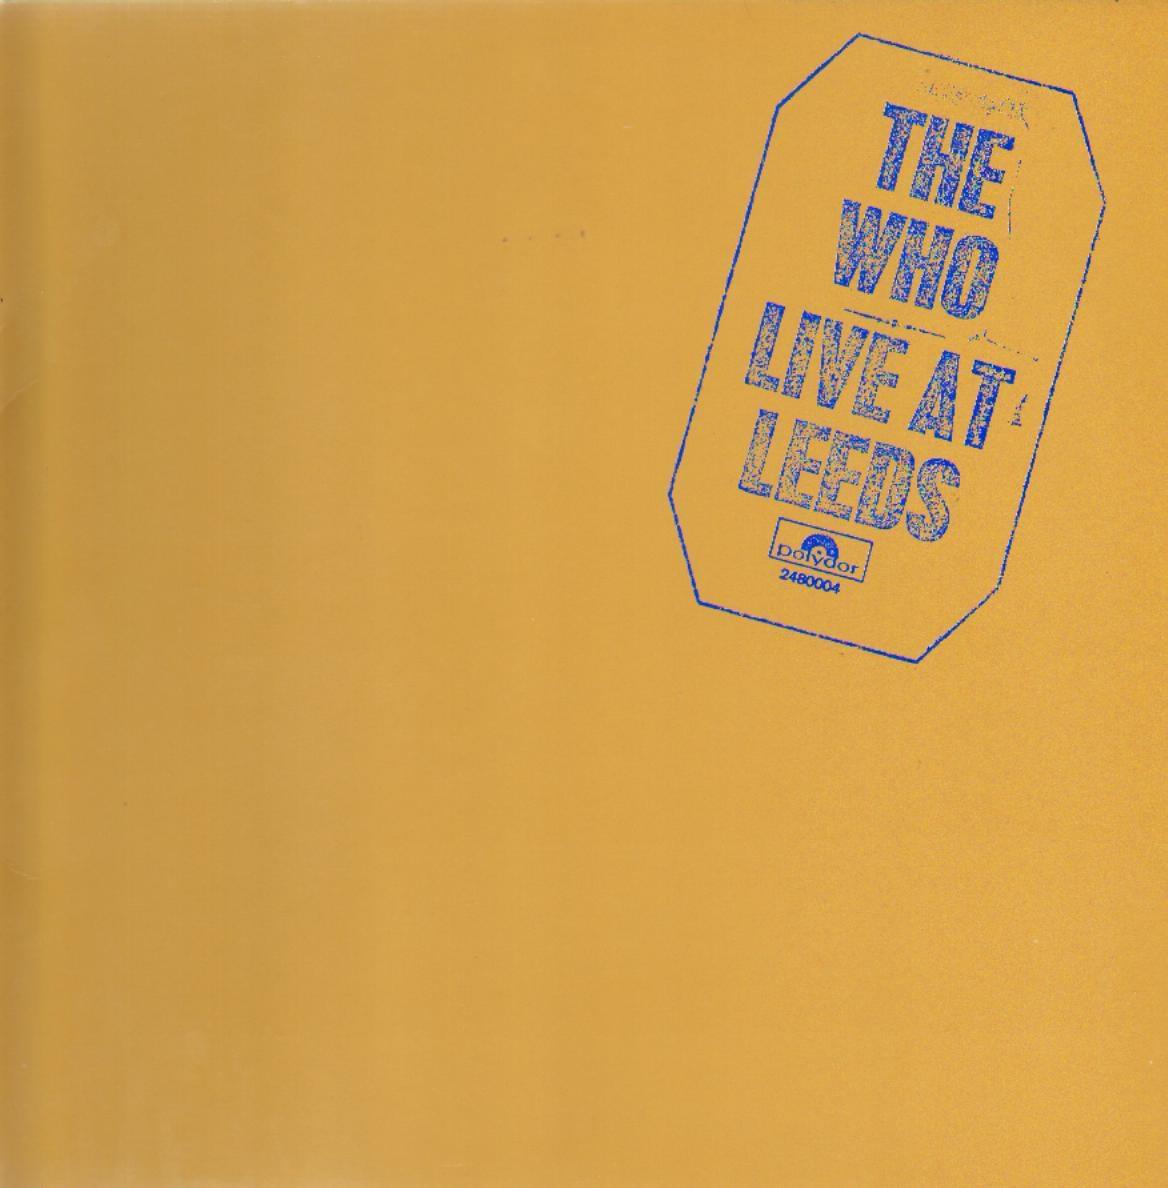 99.1 PLR Ferraro’s Market Mike’s Record Review: The Who’s Live At Leeds